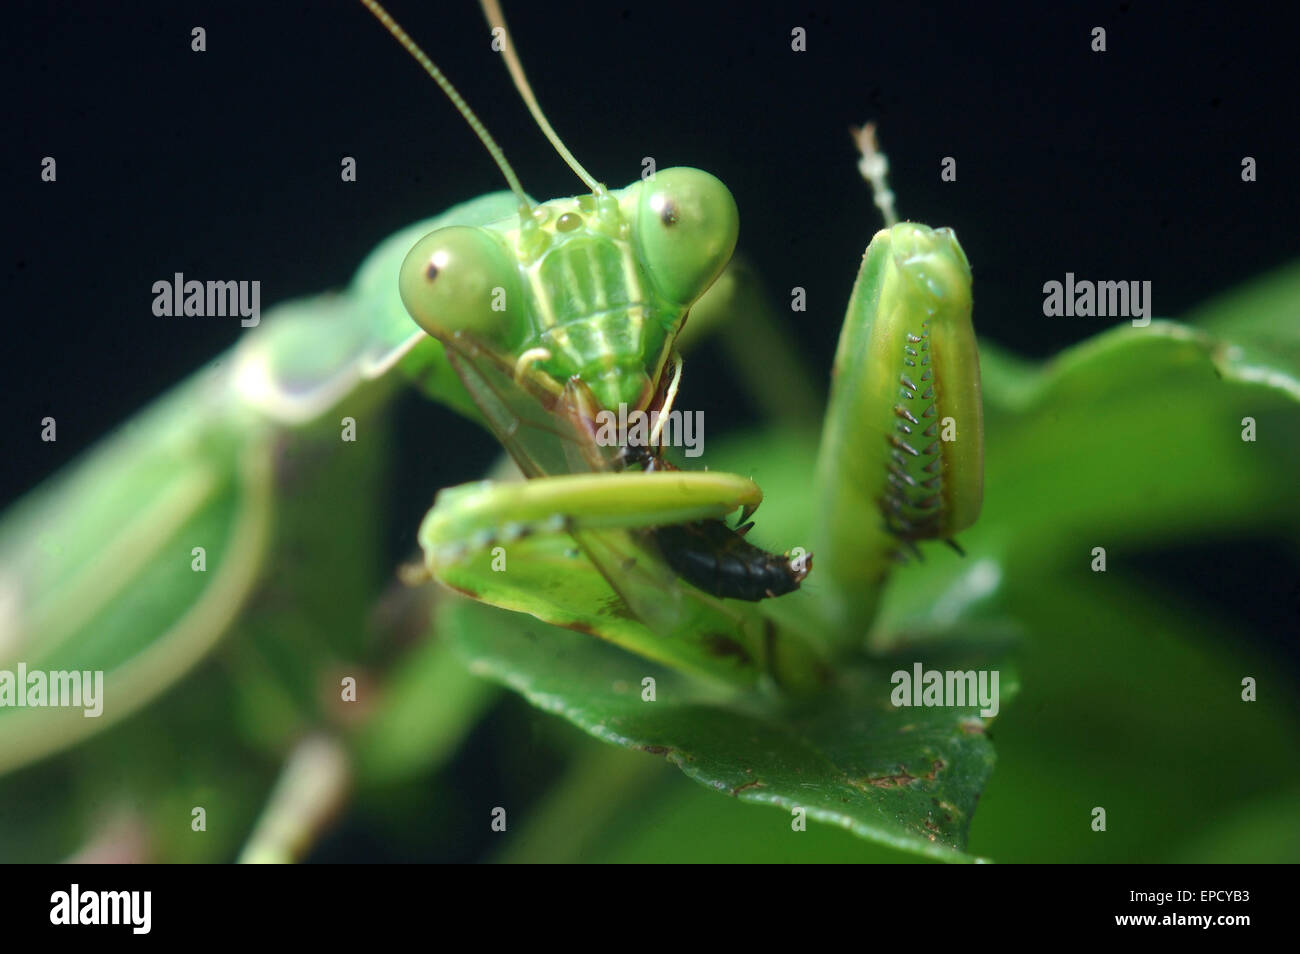 Spotted praying mantis eating another insect in Tamil Nadu, South India Stock Photo